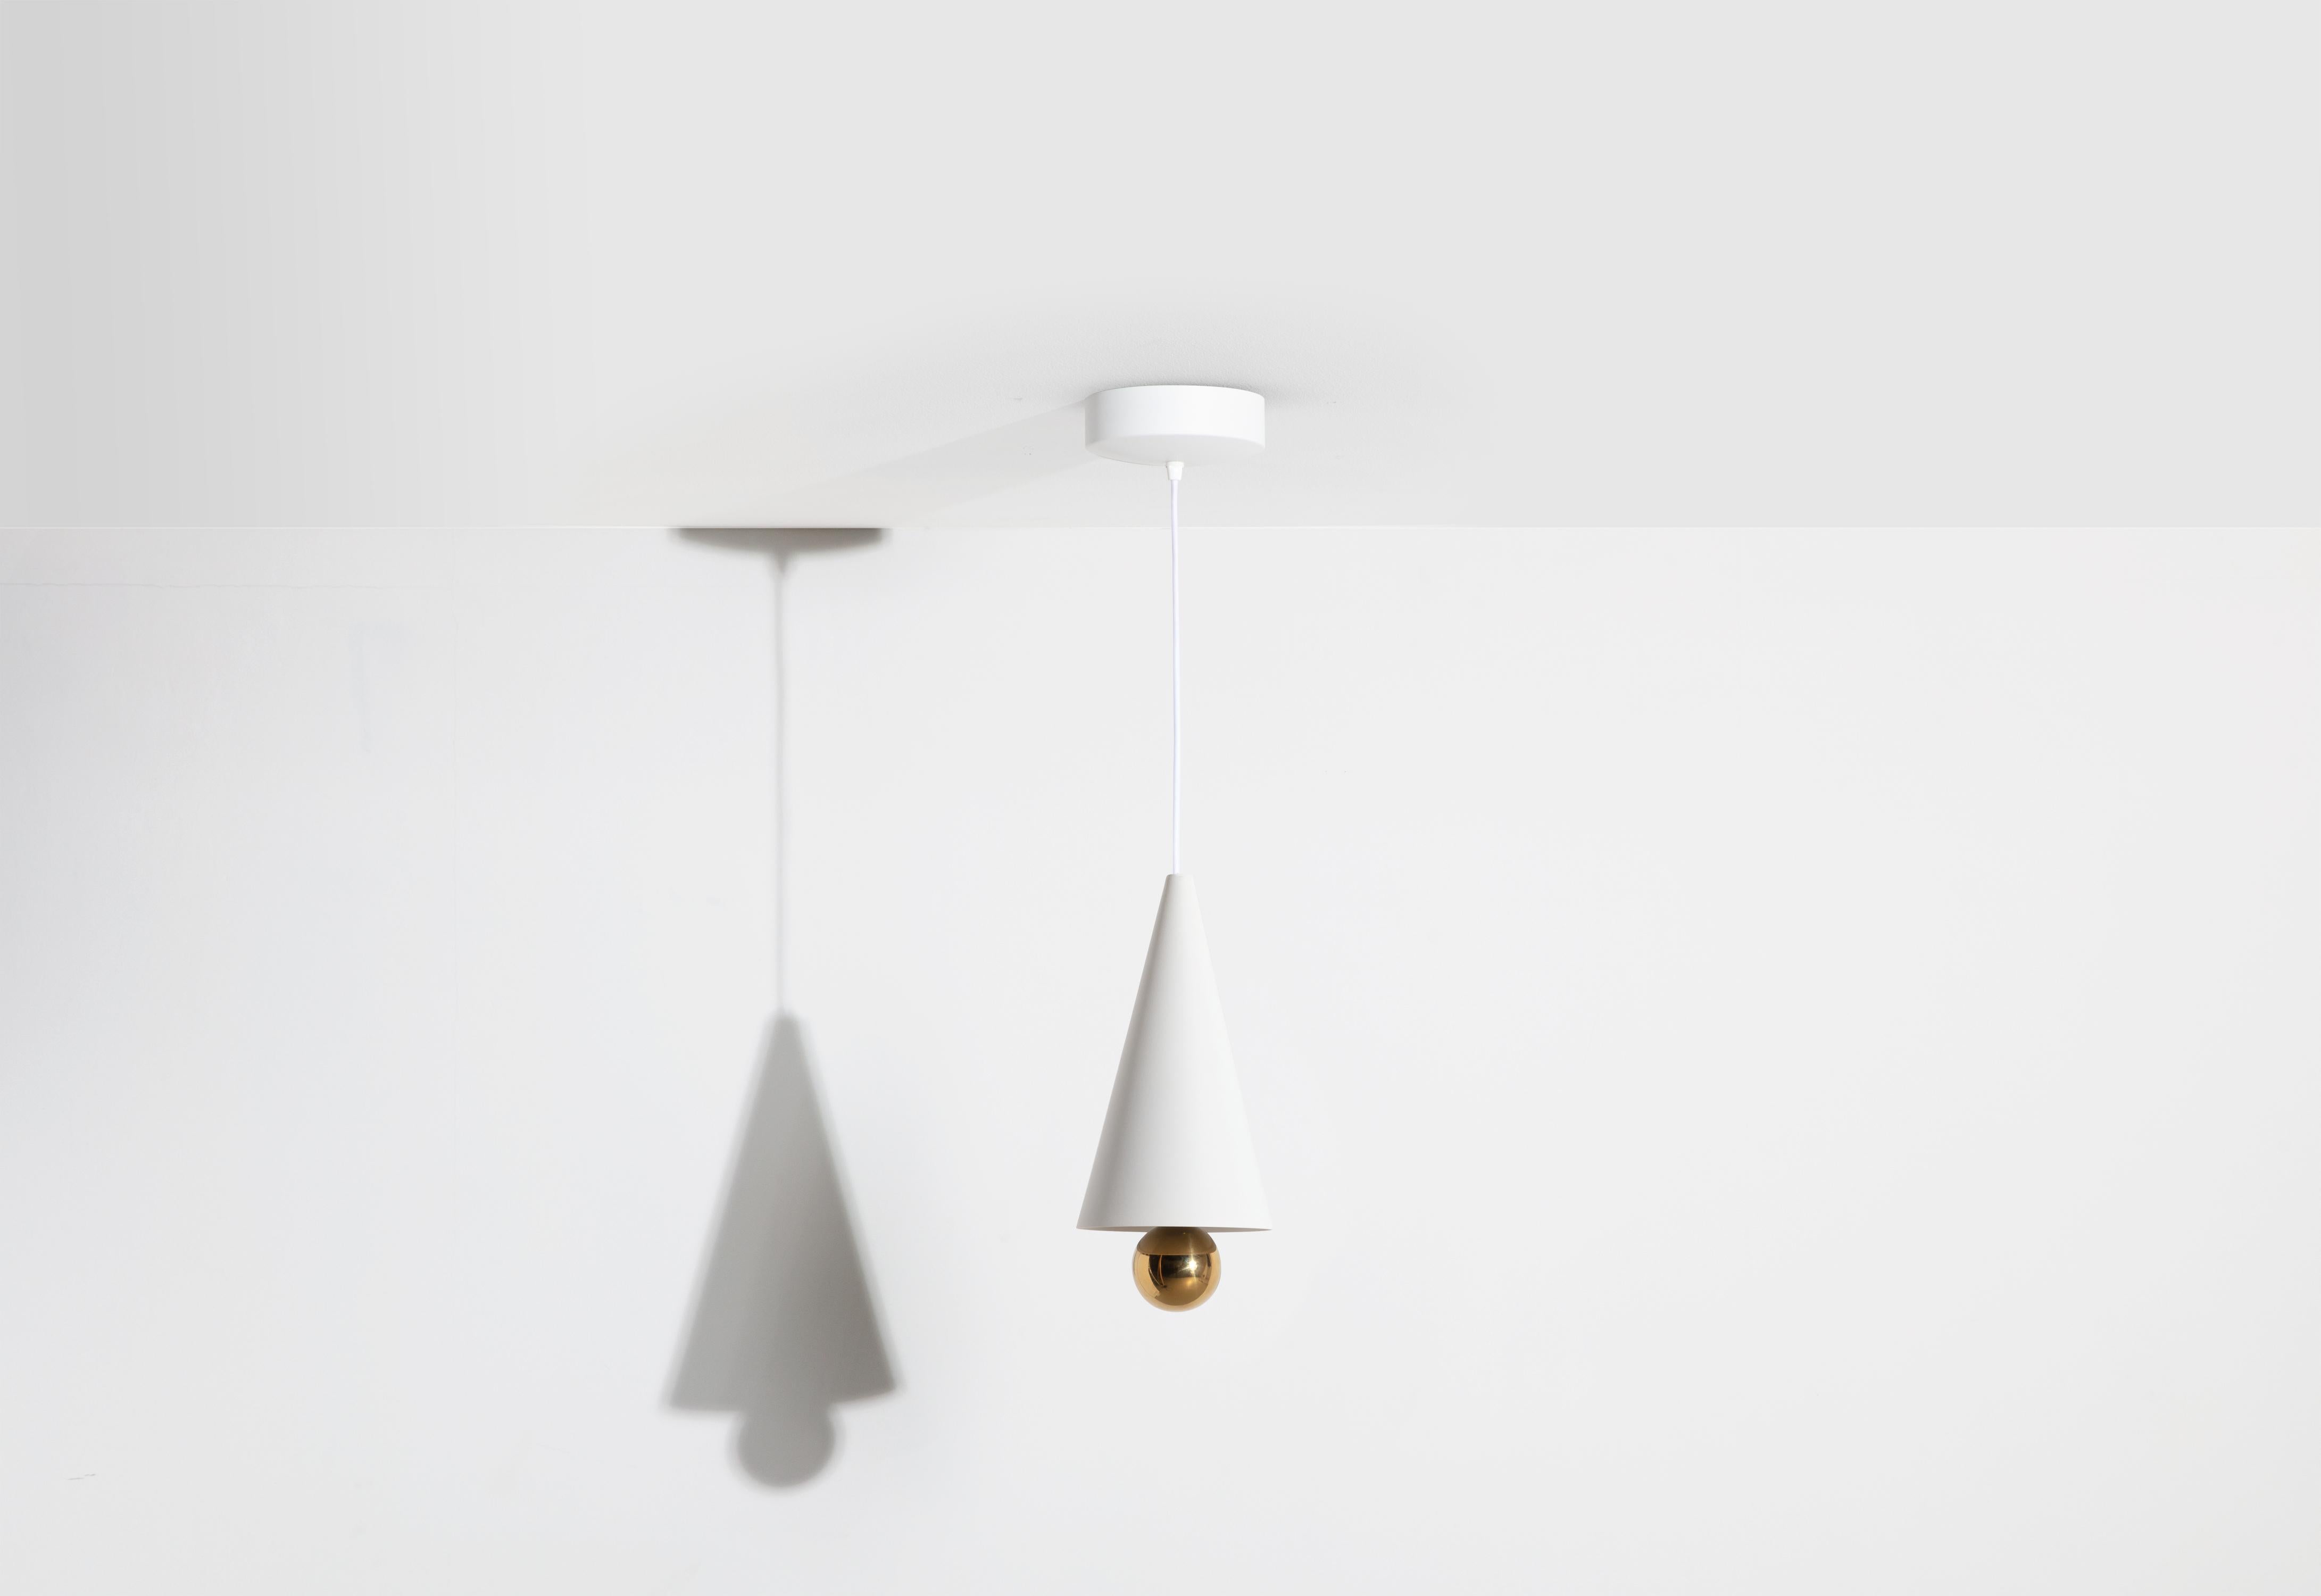 Petite Friture Small Cherry LED Pendant Light in White & Gold Aluminium by Daniel and Emma, 2020

In 2015, the Australian duo designers Daniel and Emma signed Cherry a simple and minimalist pendant lamp design ; an aluminum cone with a bottomed